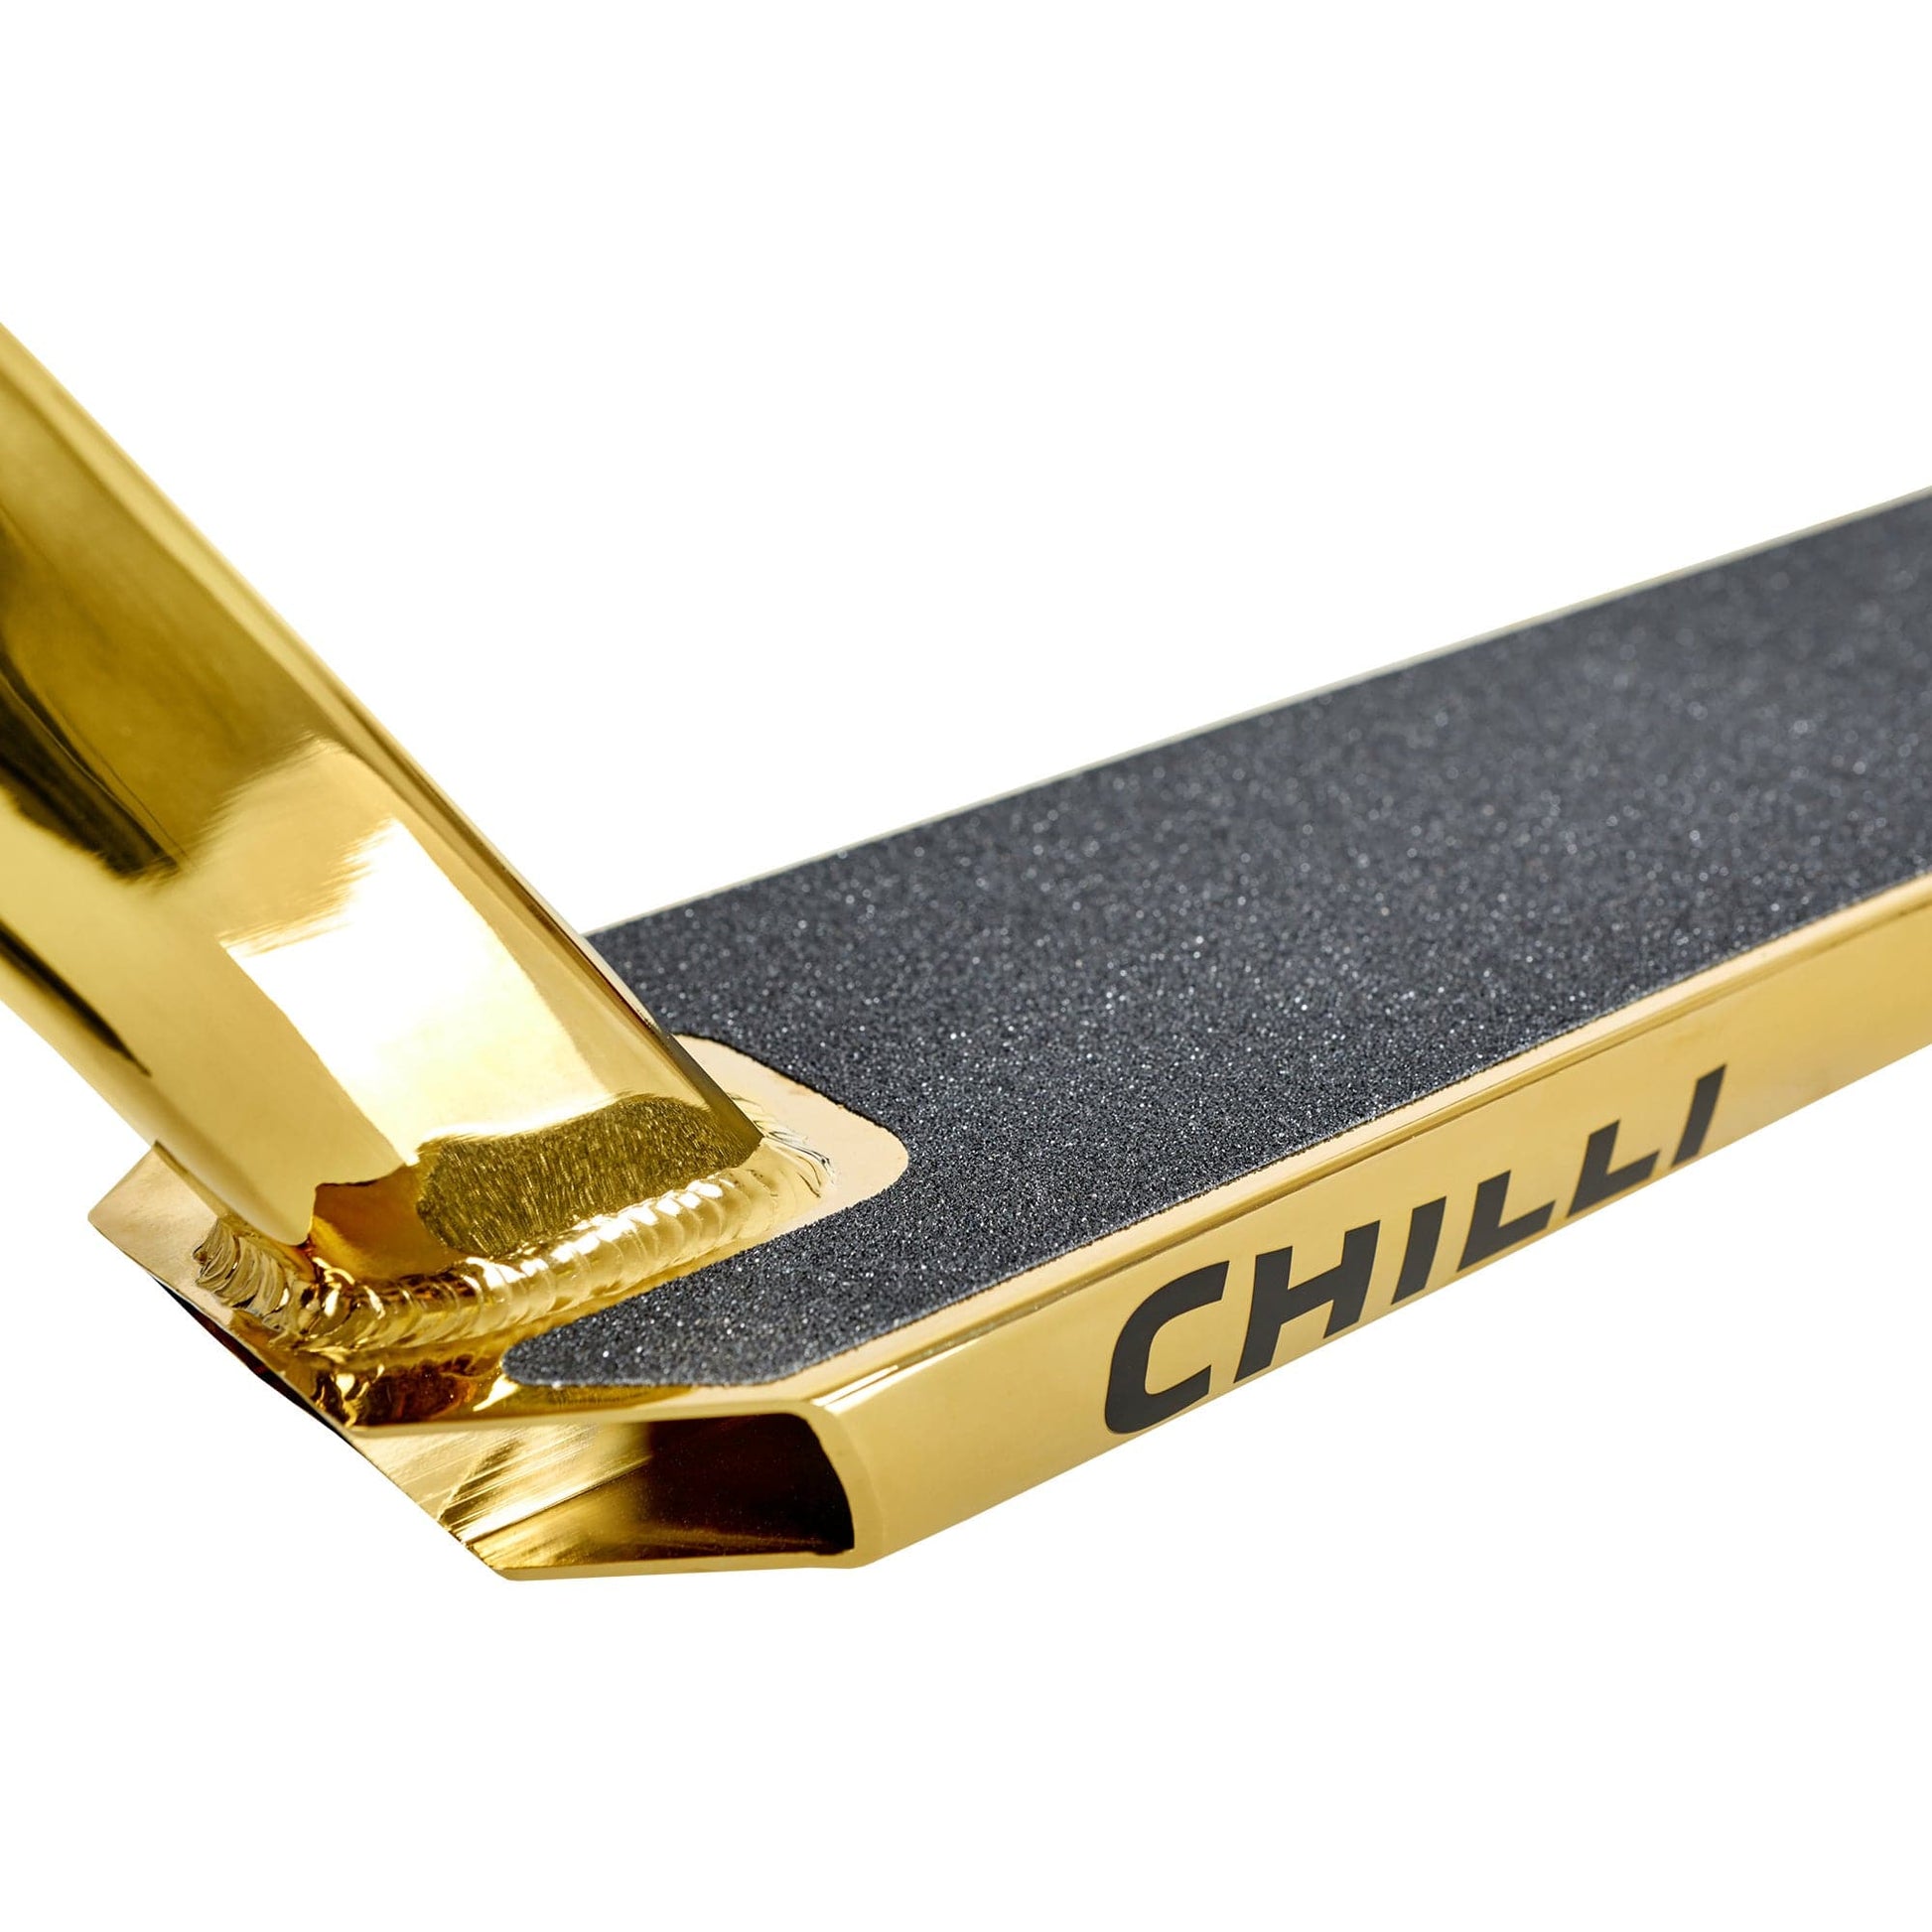 Micro Scooter Chilli Reaper - Gold deck close up